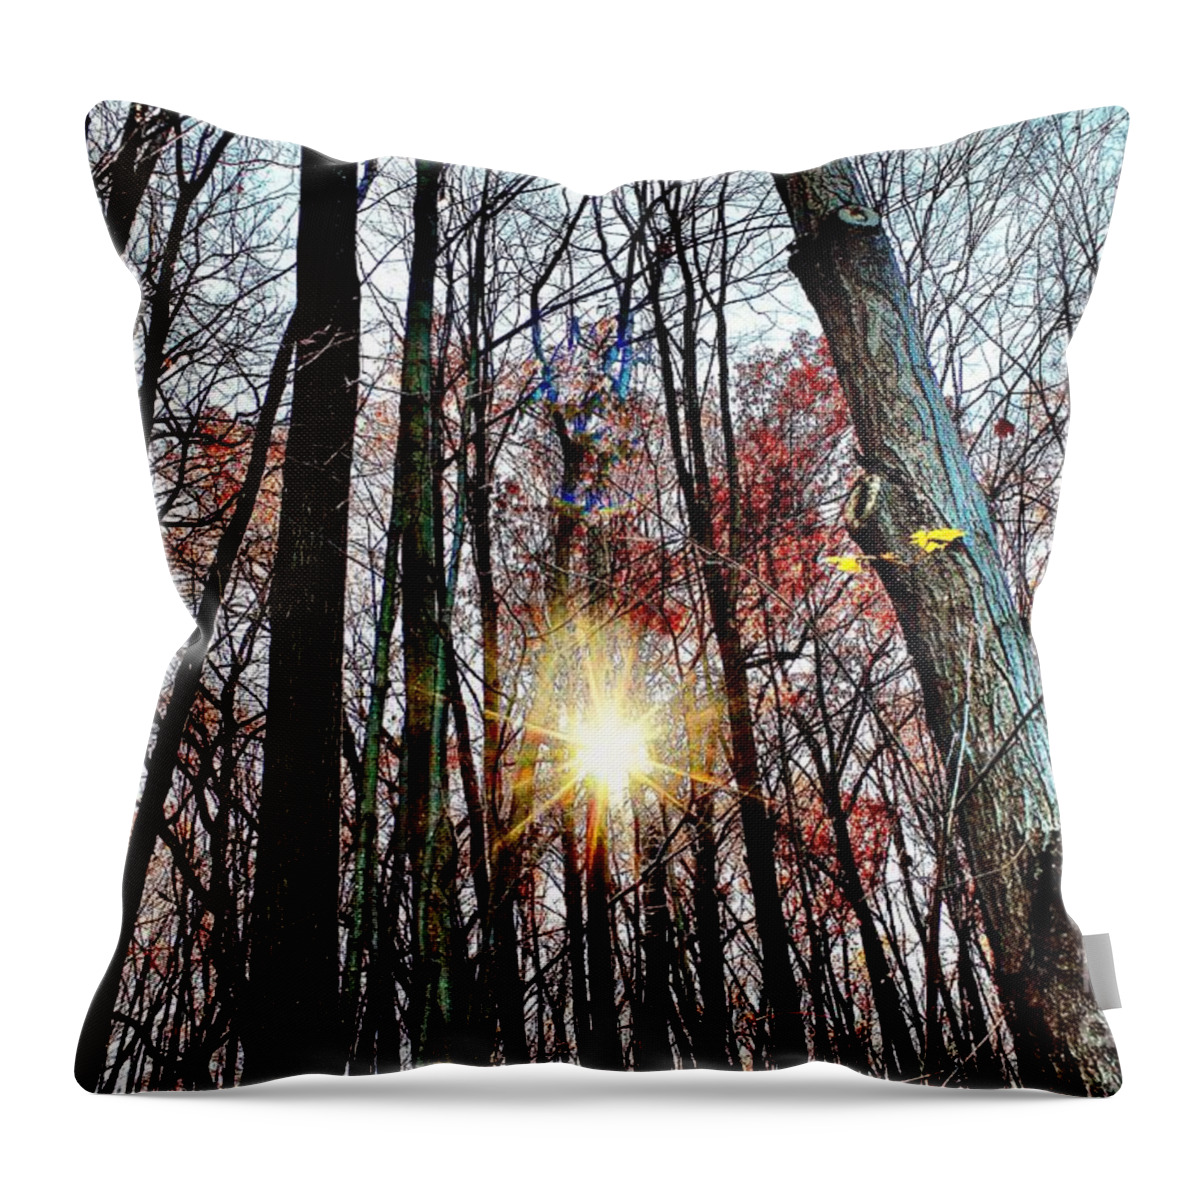 Photograph Throw Pillow featuring the photograph Nature #1 by MaryLee Parker